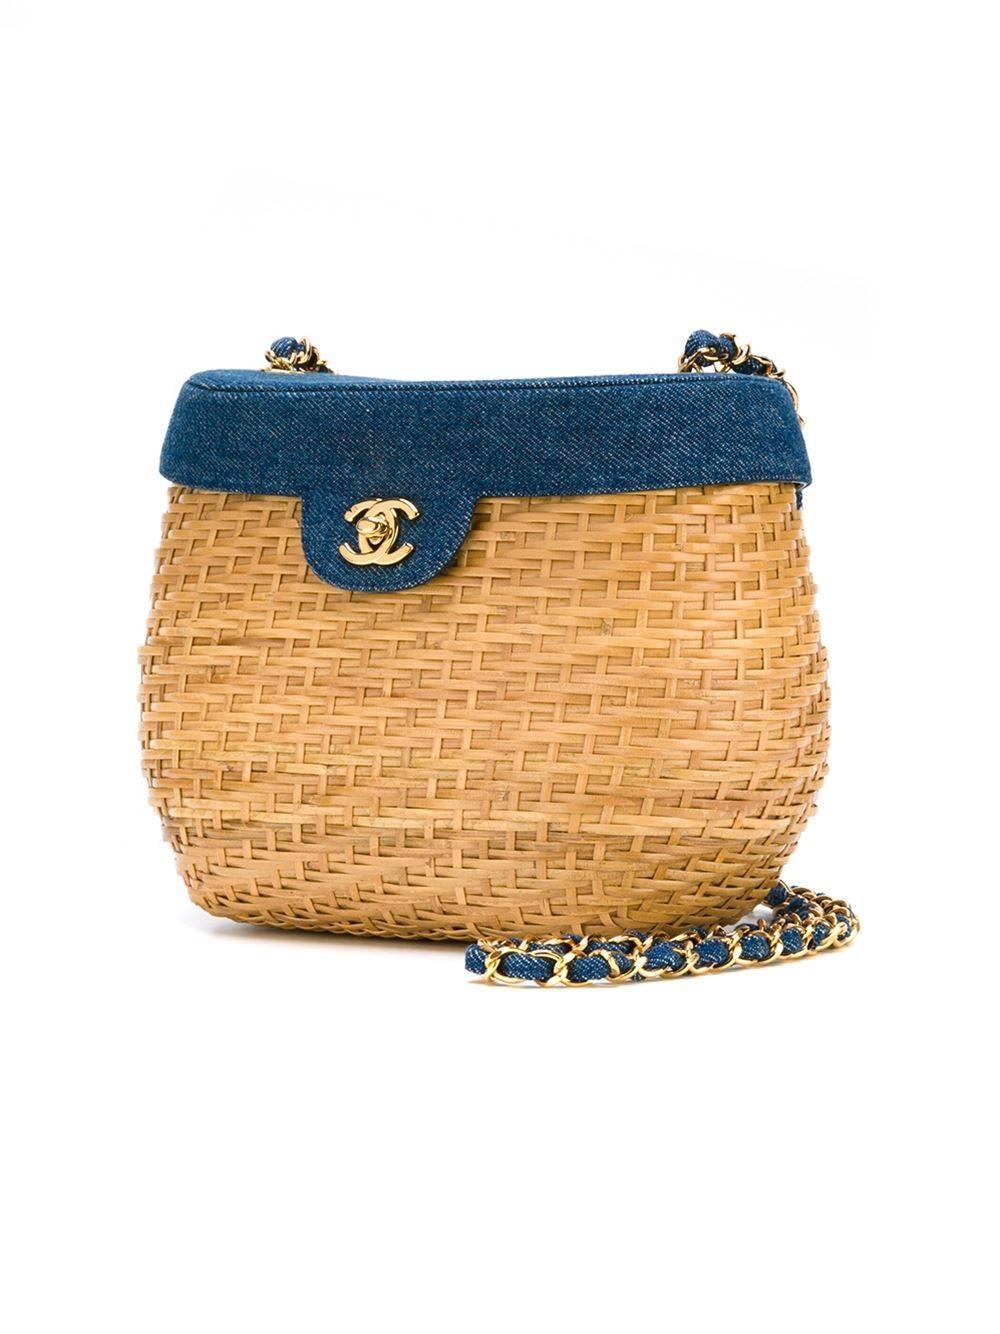 Denim and wicker basket crossbody bag from Chanel Vintage featuring a woven design, a gold-tone chain shoulder strap, a gold-tone logo plaque, foldover top with twist-lock closure, an internal zipped pocket and an internal logo stamp. 

Colour: